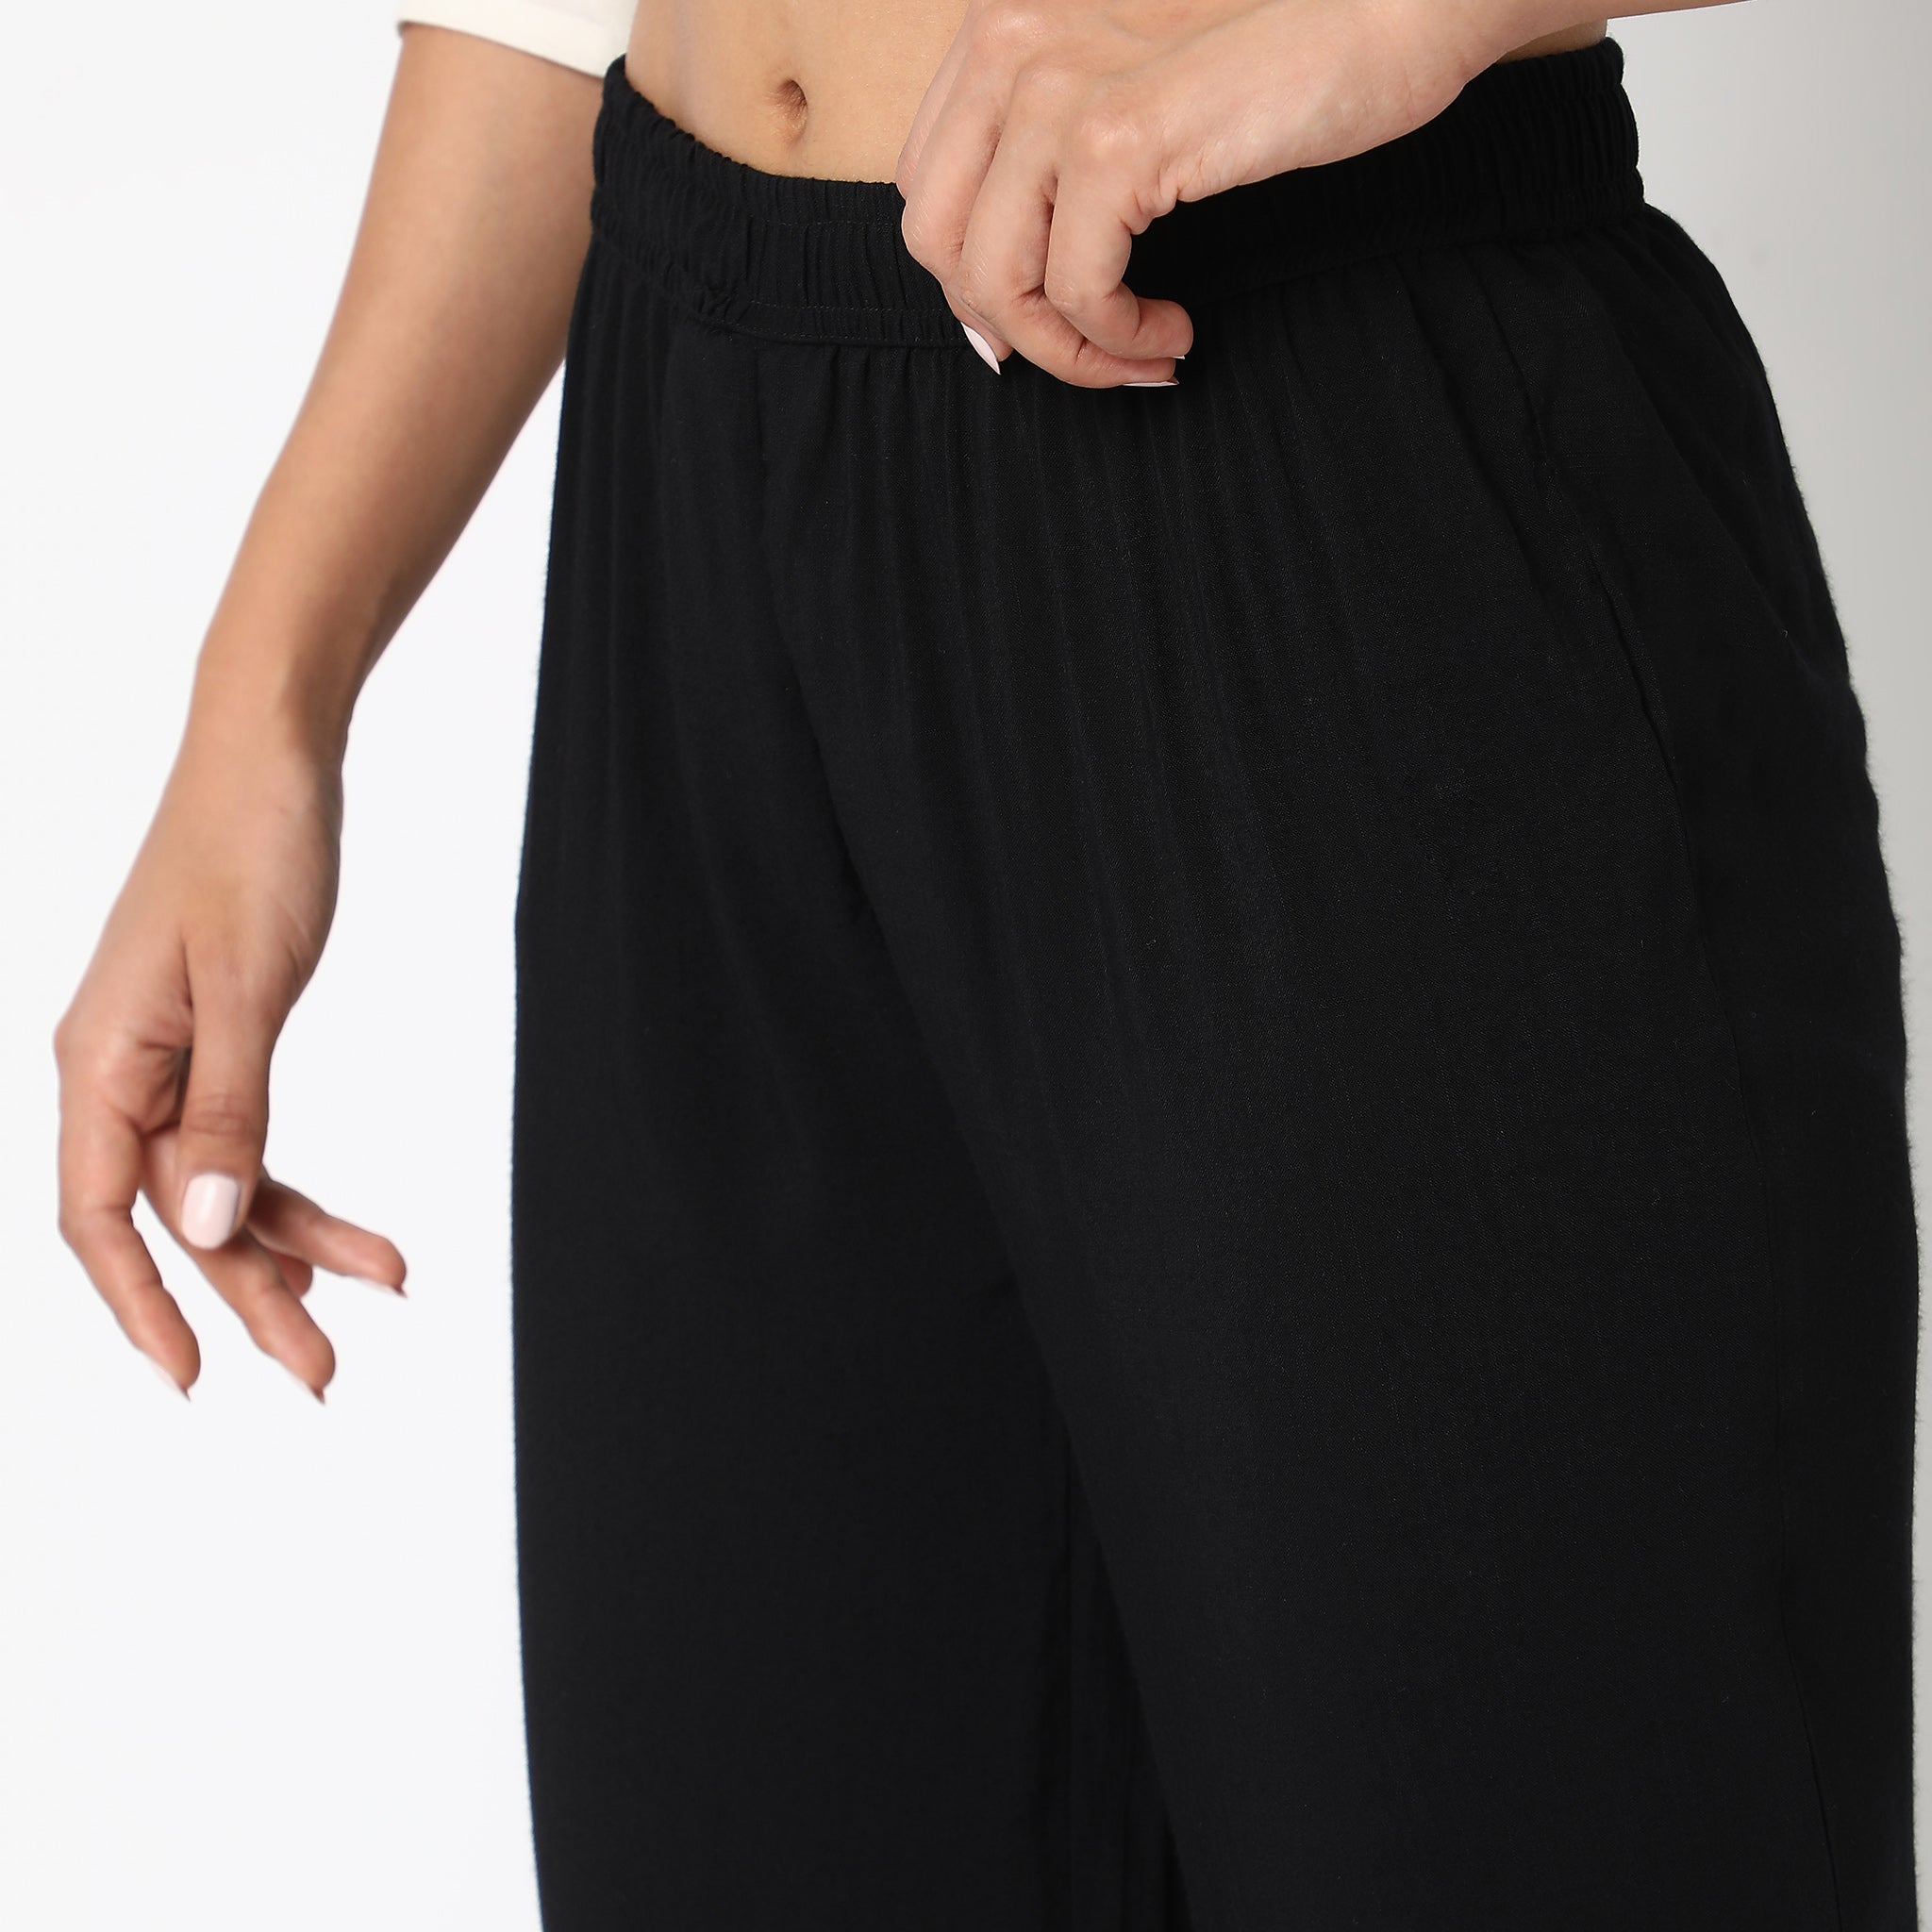 Regular Fit Embroidered Ethnic Pants